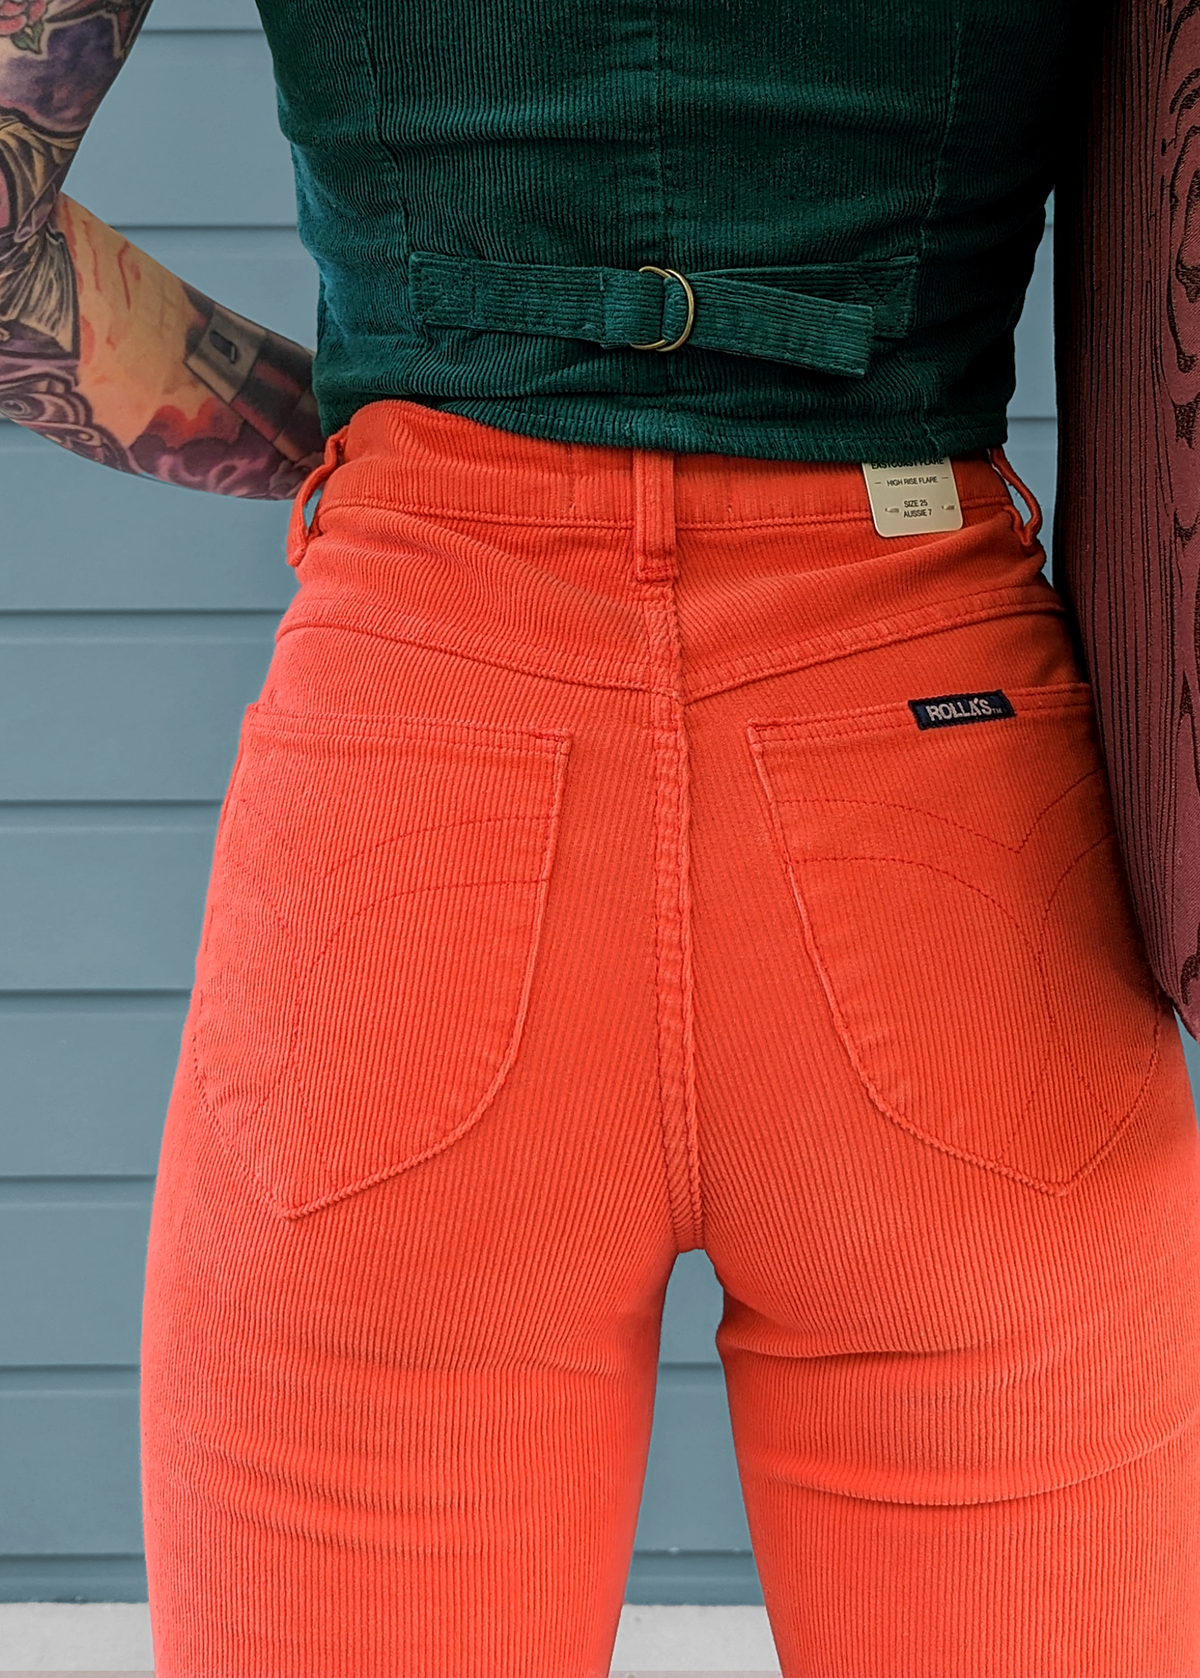 70s inspired Blood Orange Corduroy High Rise Waist Eastcoast Corduroy Flares by Rolla's Jeans